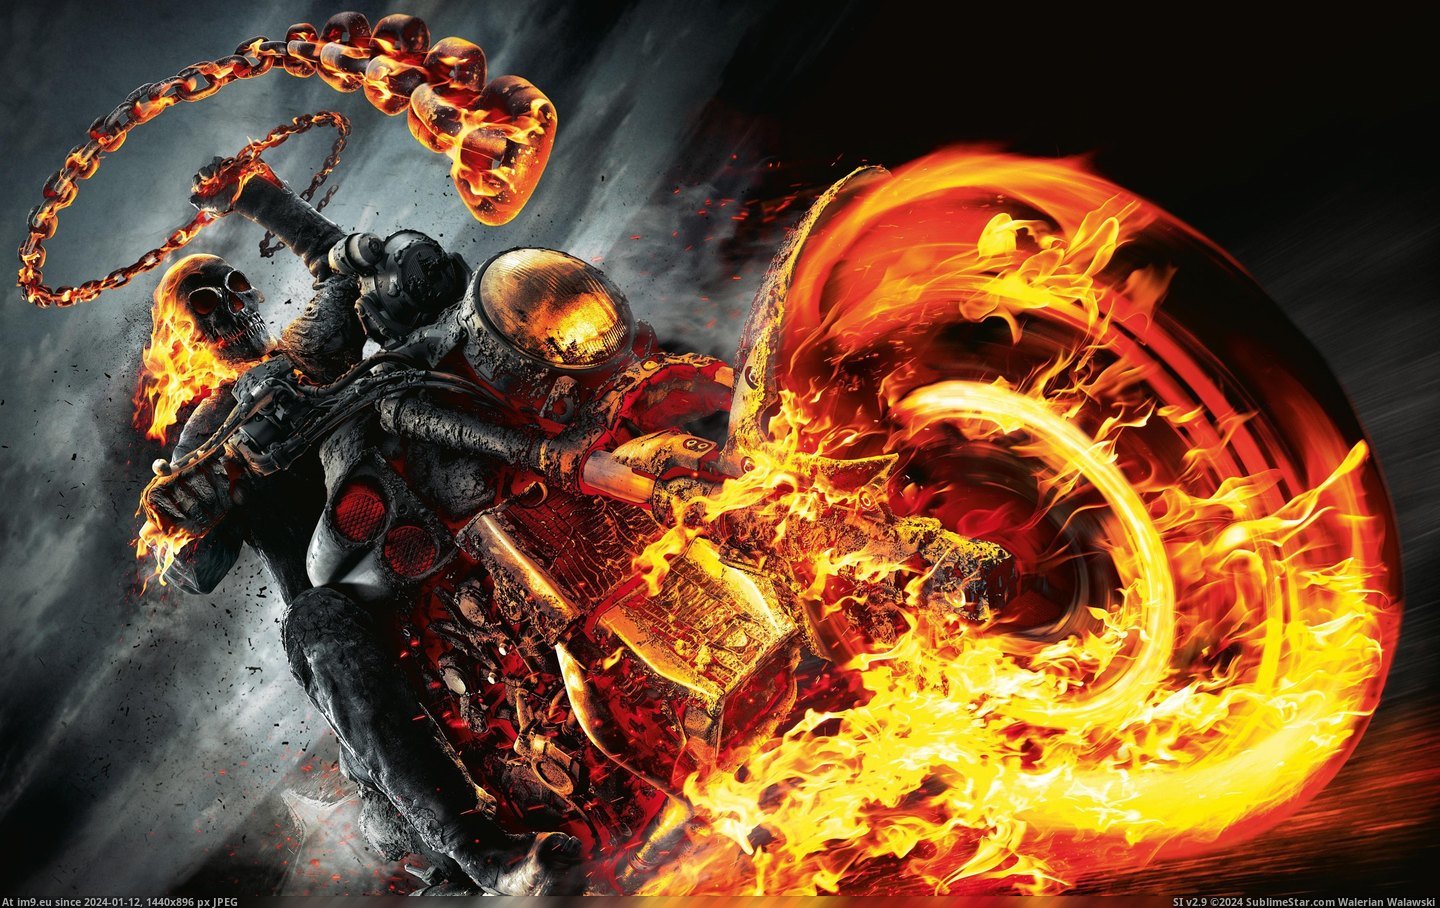 #Wallpaper #Ghost #Rider #Wide Ghost Rider Wide HD Wallpaper Pic. (Изображение из альбом Unique HD Wallpapers))